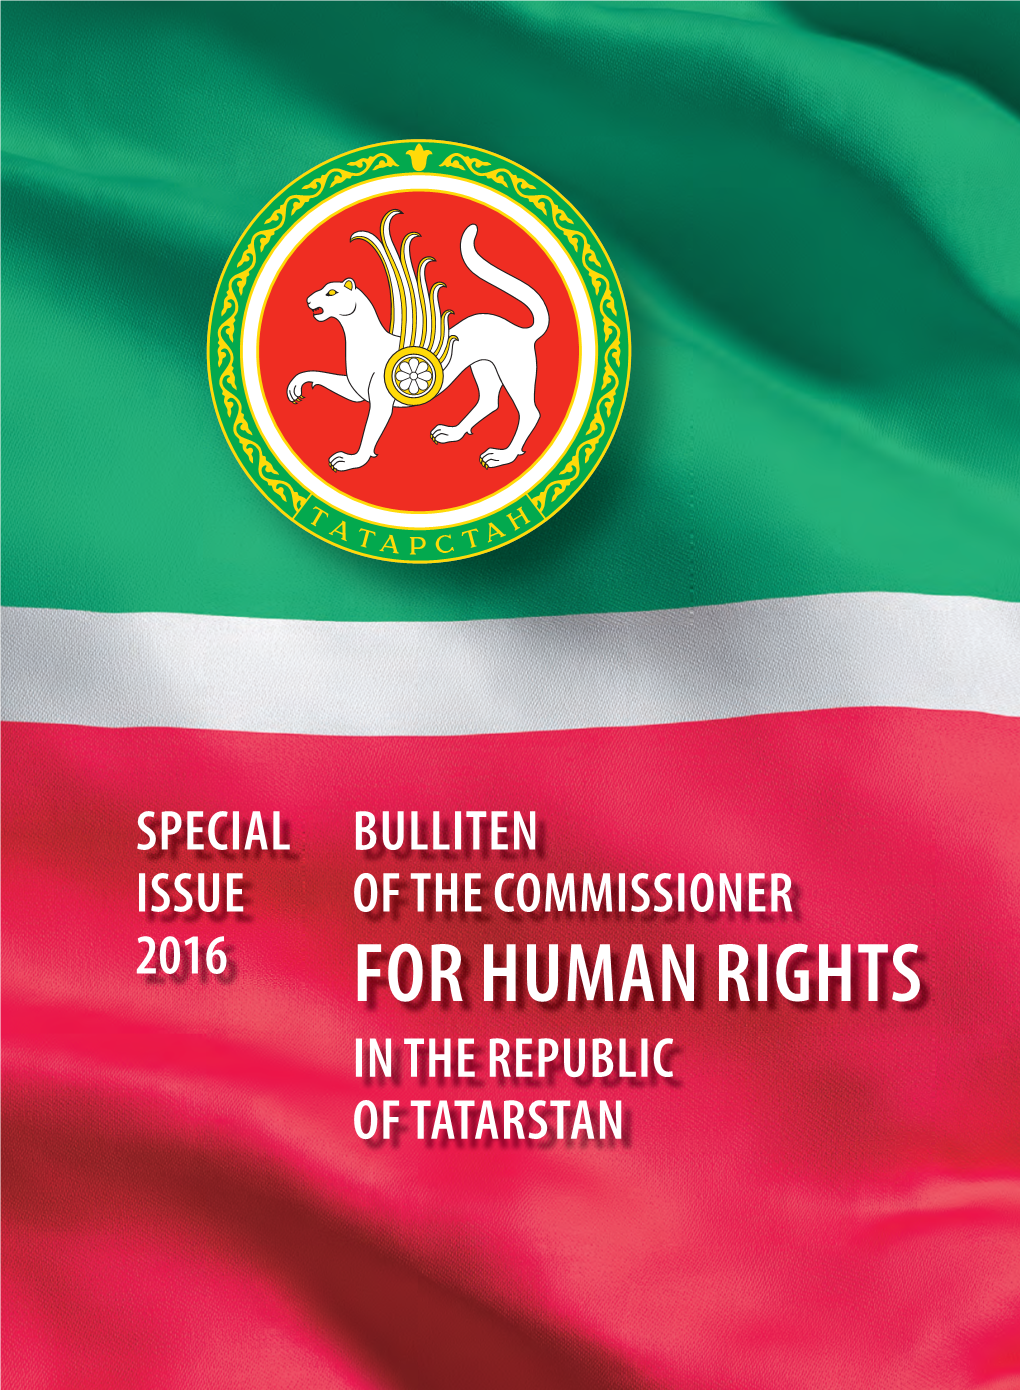 For Human Rights in the Republic of Tatarstan All Human Beings Are Born Free and Equal in Dignity and Rights